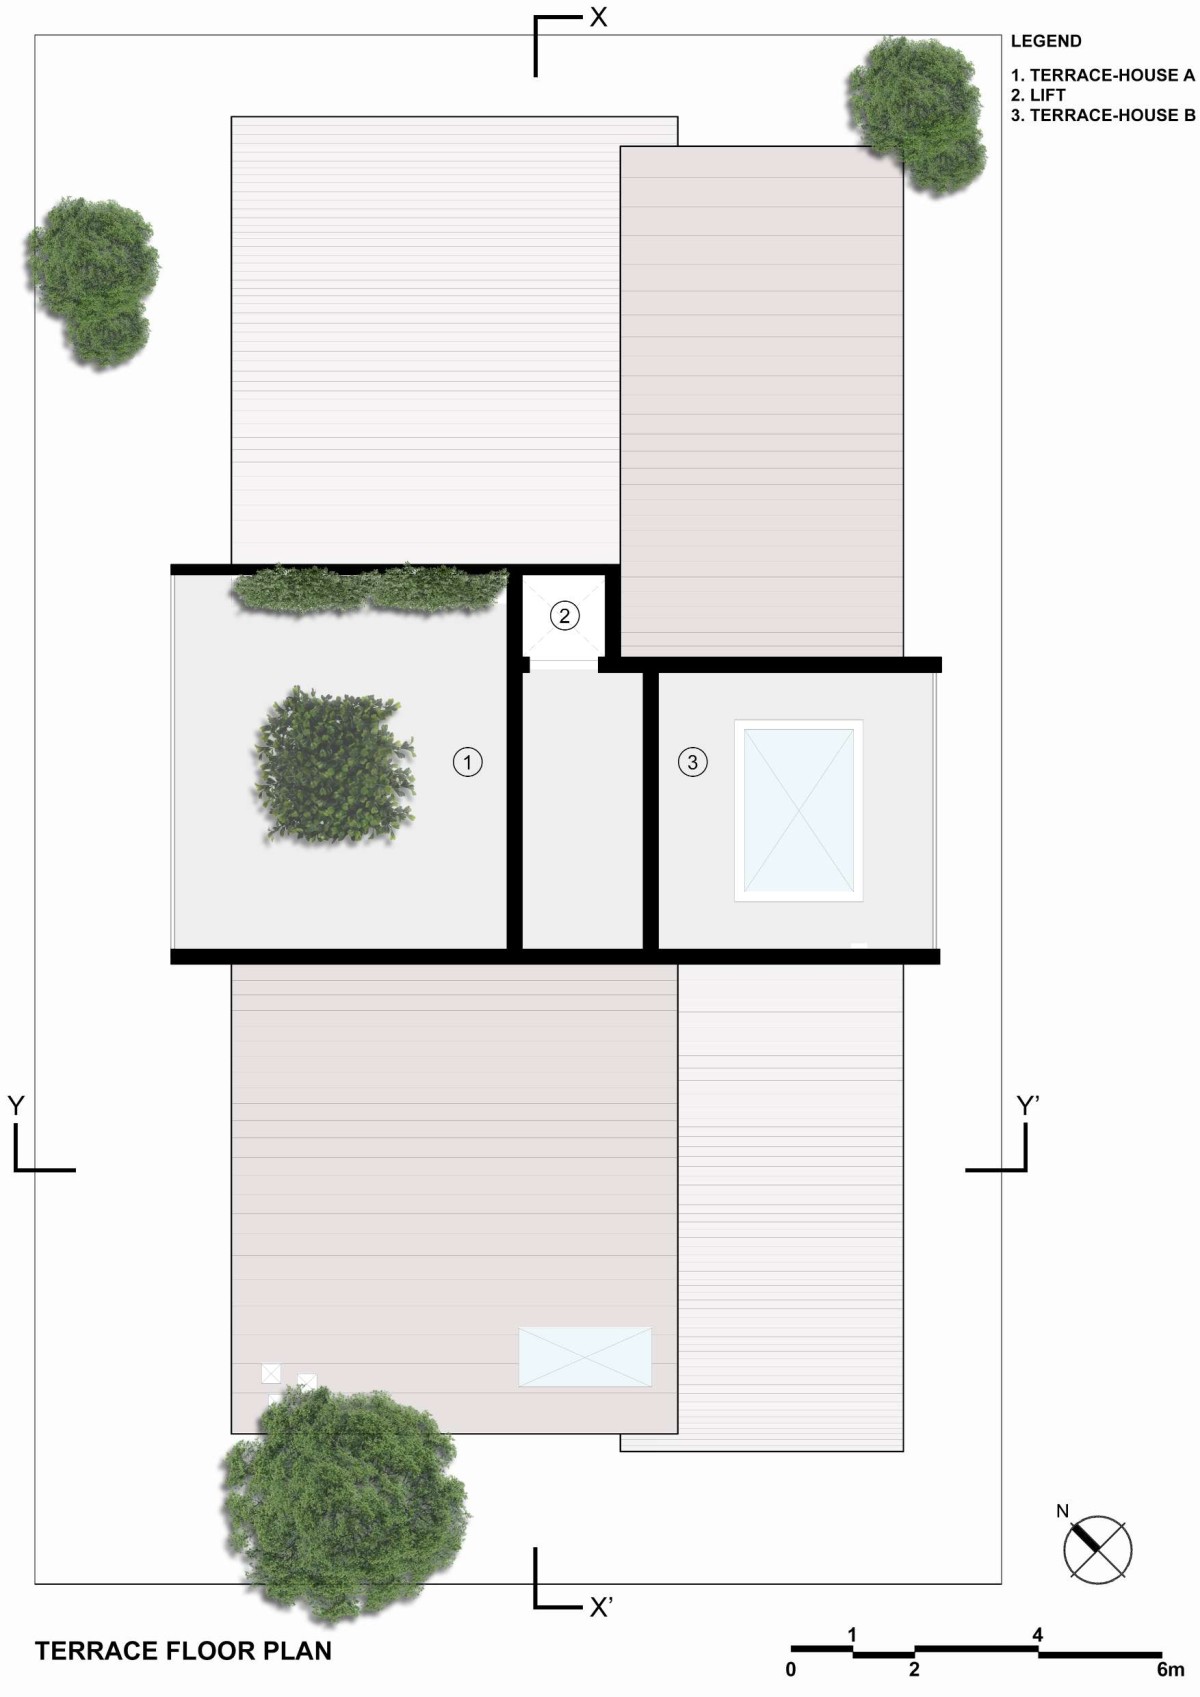 Terrace floor plan of Linear House by Int-Hab Architecture + Design Studio